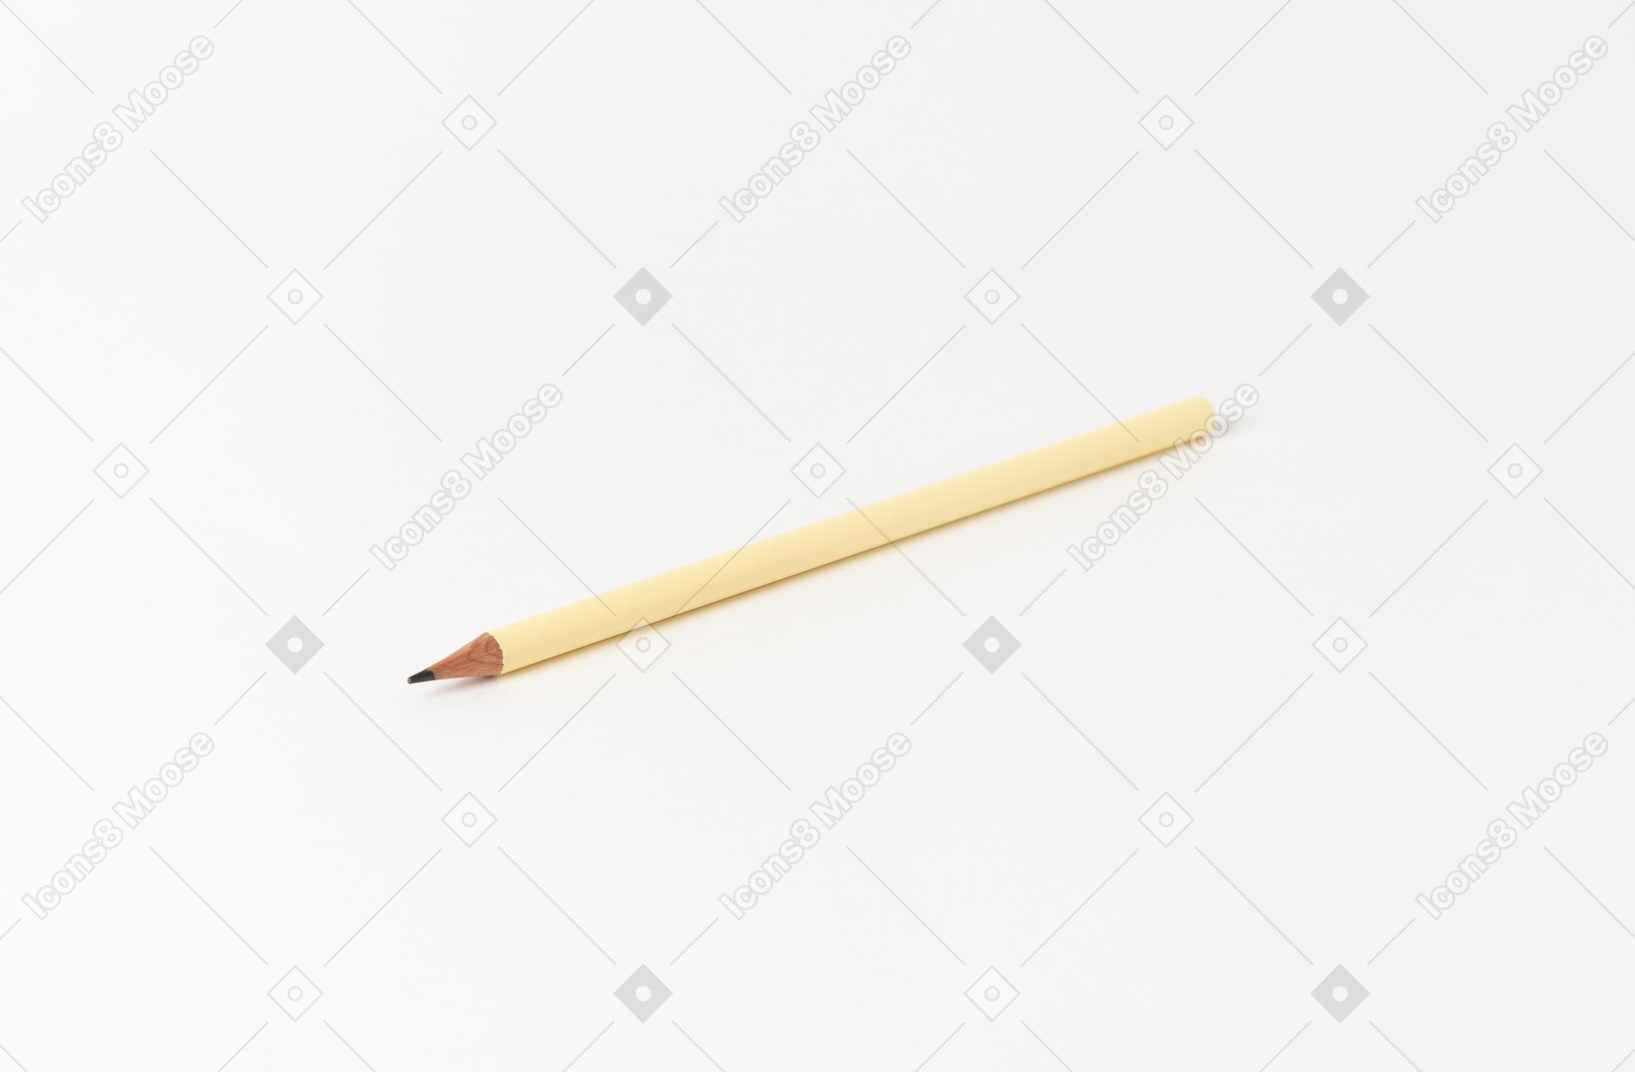 Isolated object on white background